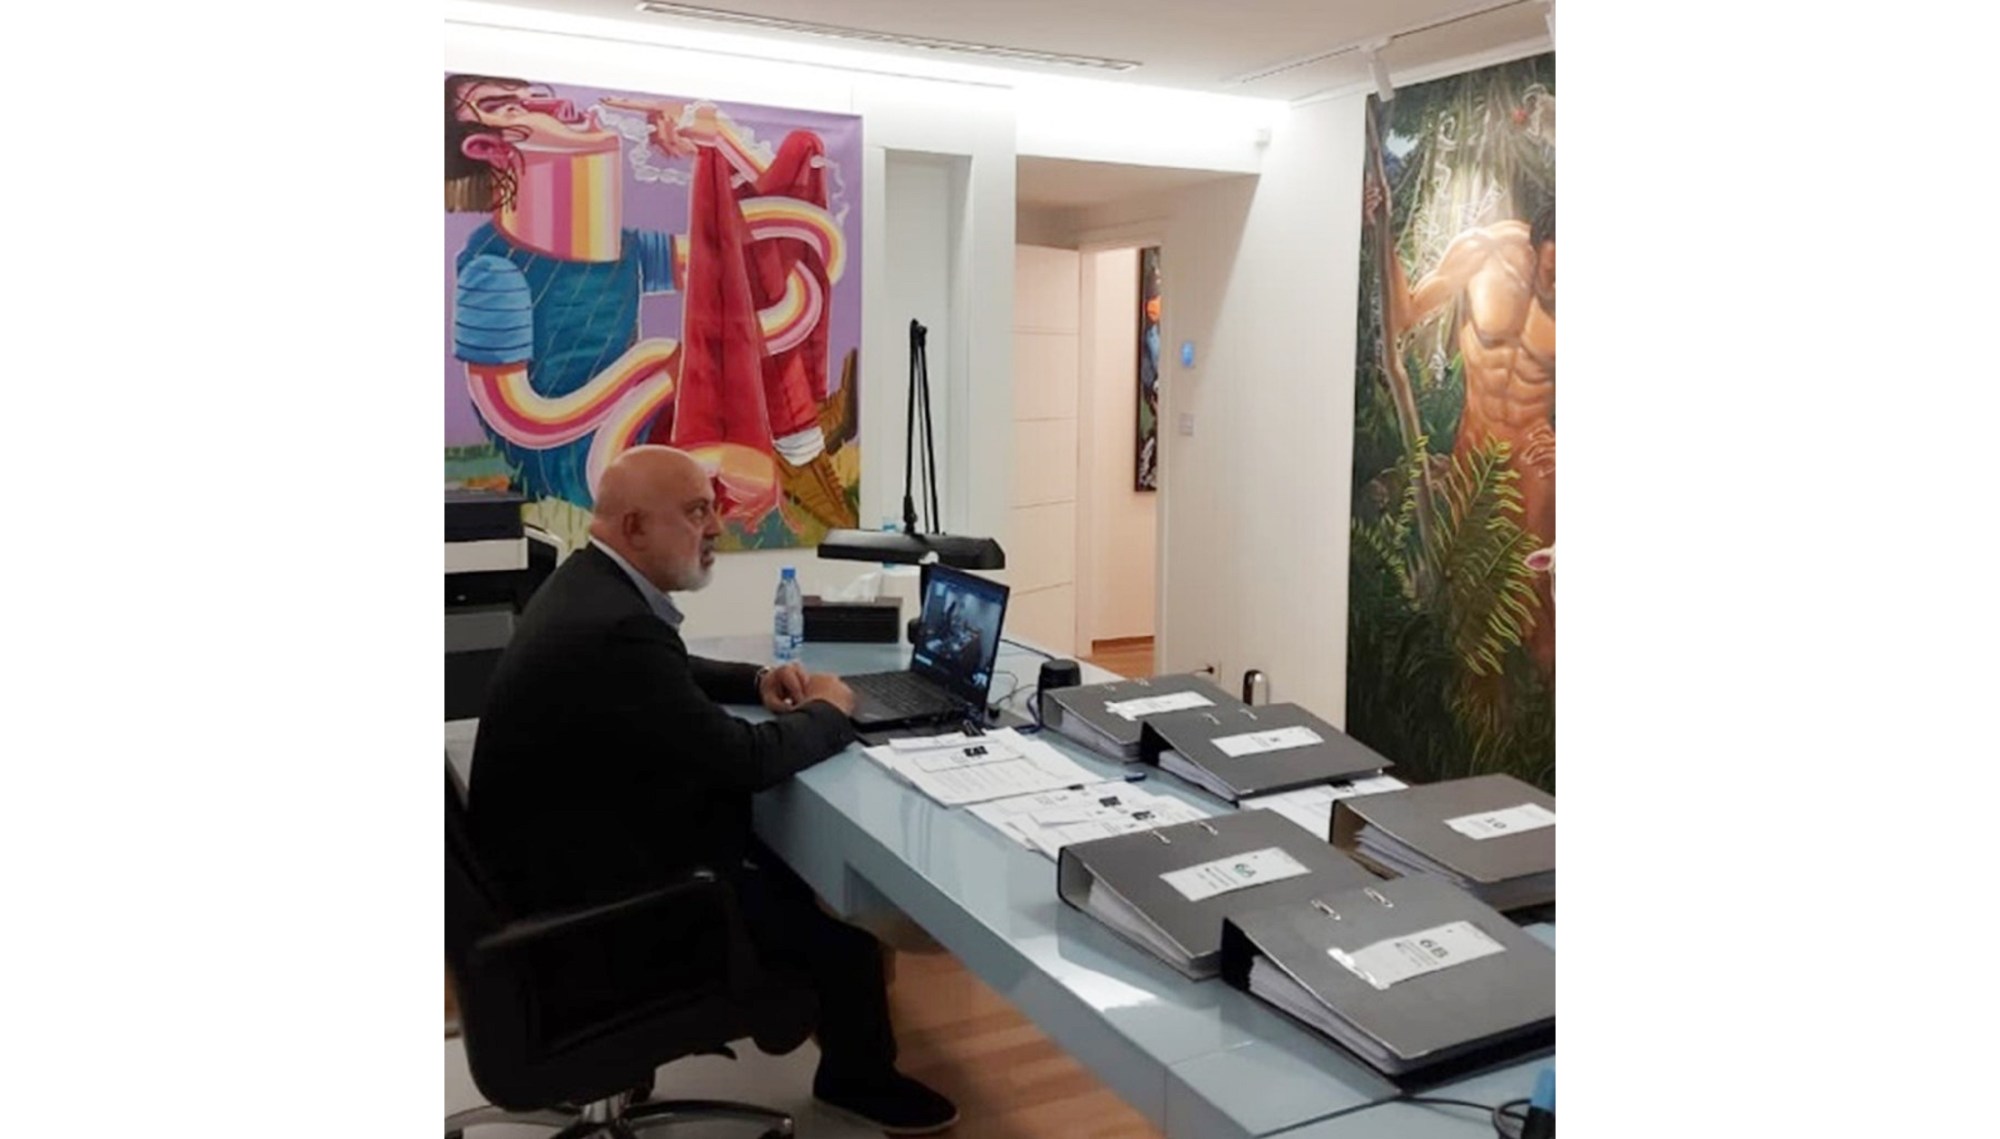 Art collector Nazem Ahmad sits in an office chair in front of a laptop, papers, and several thick black binders on a long off-white desk. Two large paintings have been hung on the walls to his left and in front of him. Nazem is staring forward and wearing a suit with casual shoes.